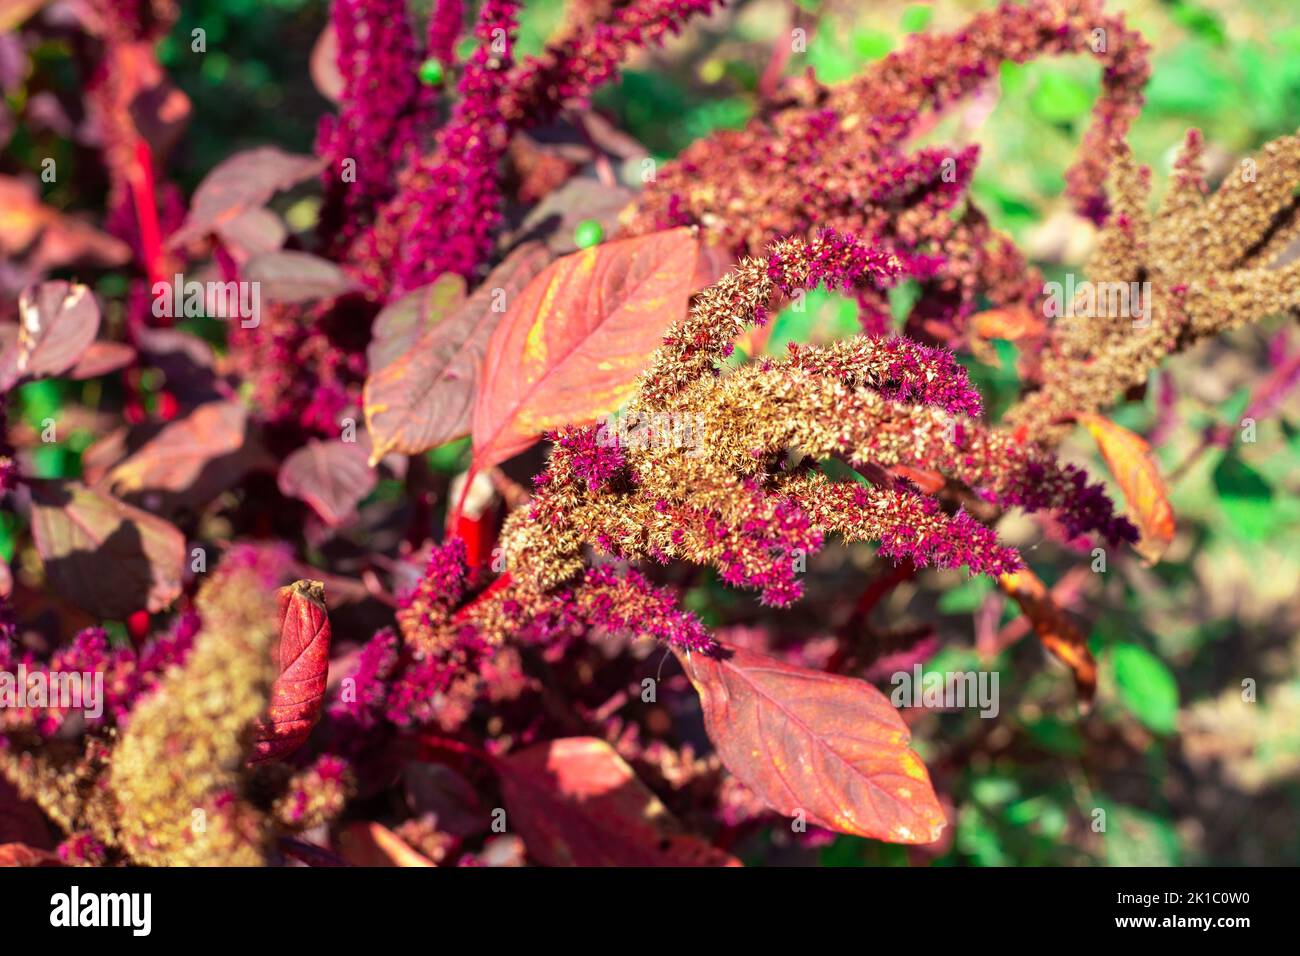 Seeds of red vegetable amaranth on a plant branch. Decorative edible plant. Stock Photo